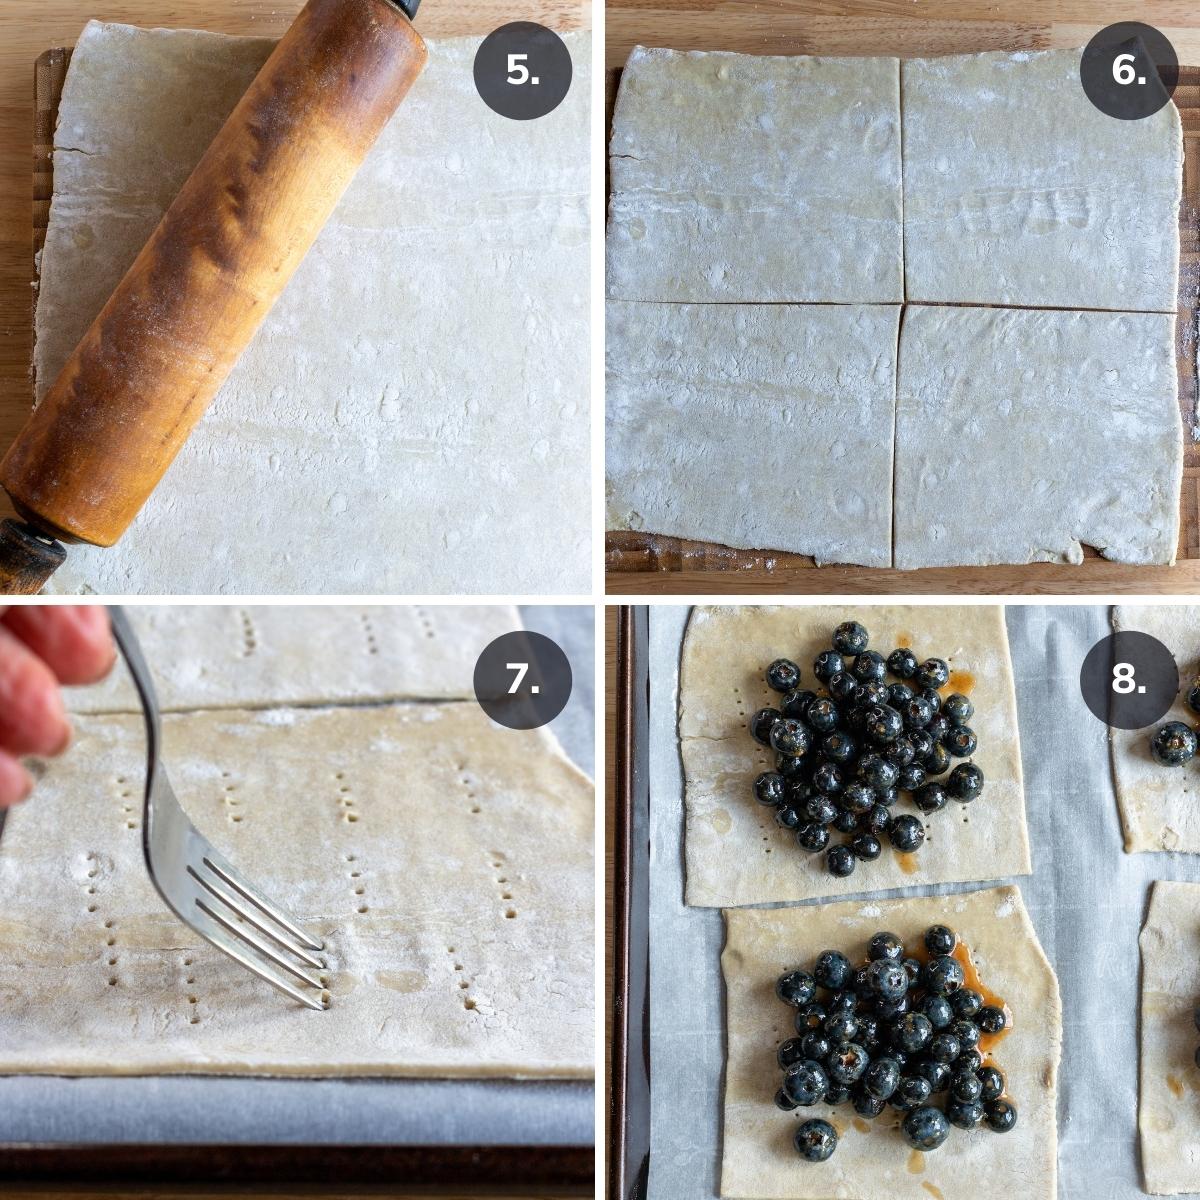 Rolling out puff pastry dough, cutting and putting in blueberry filling.